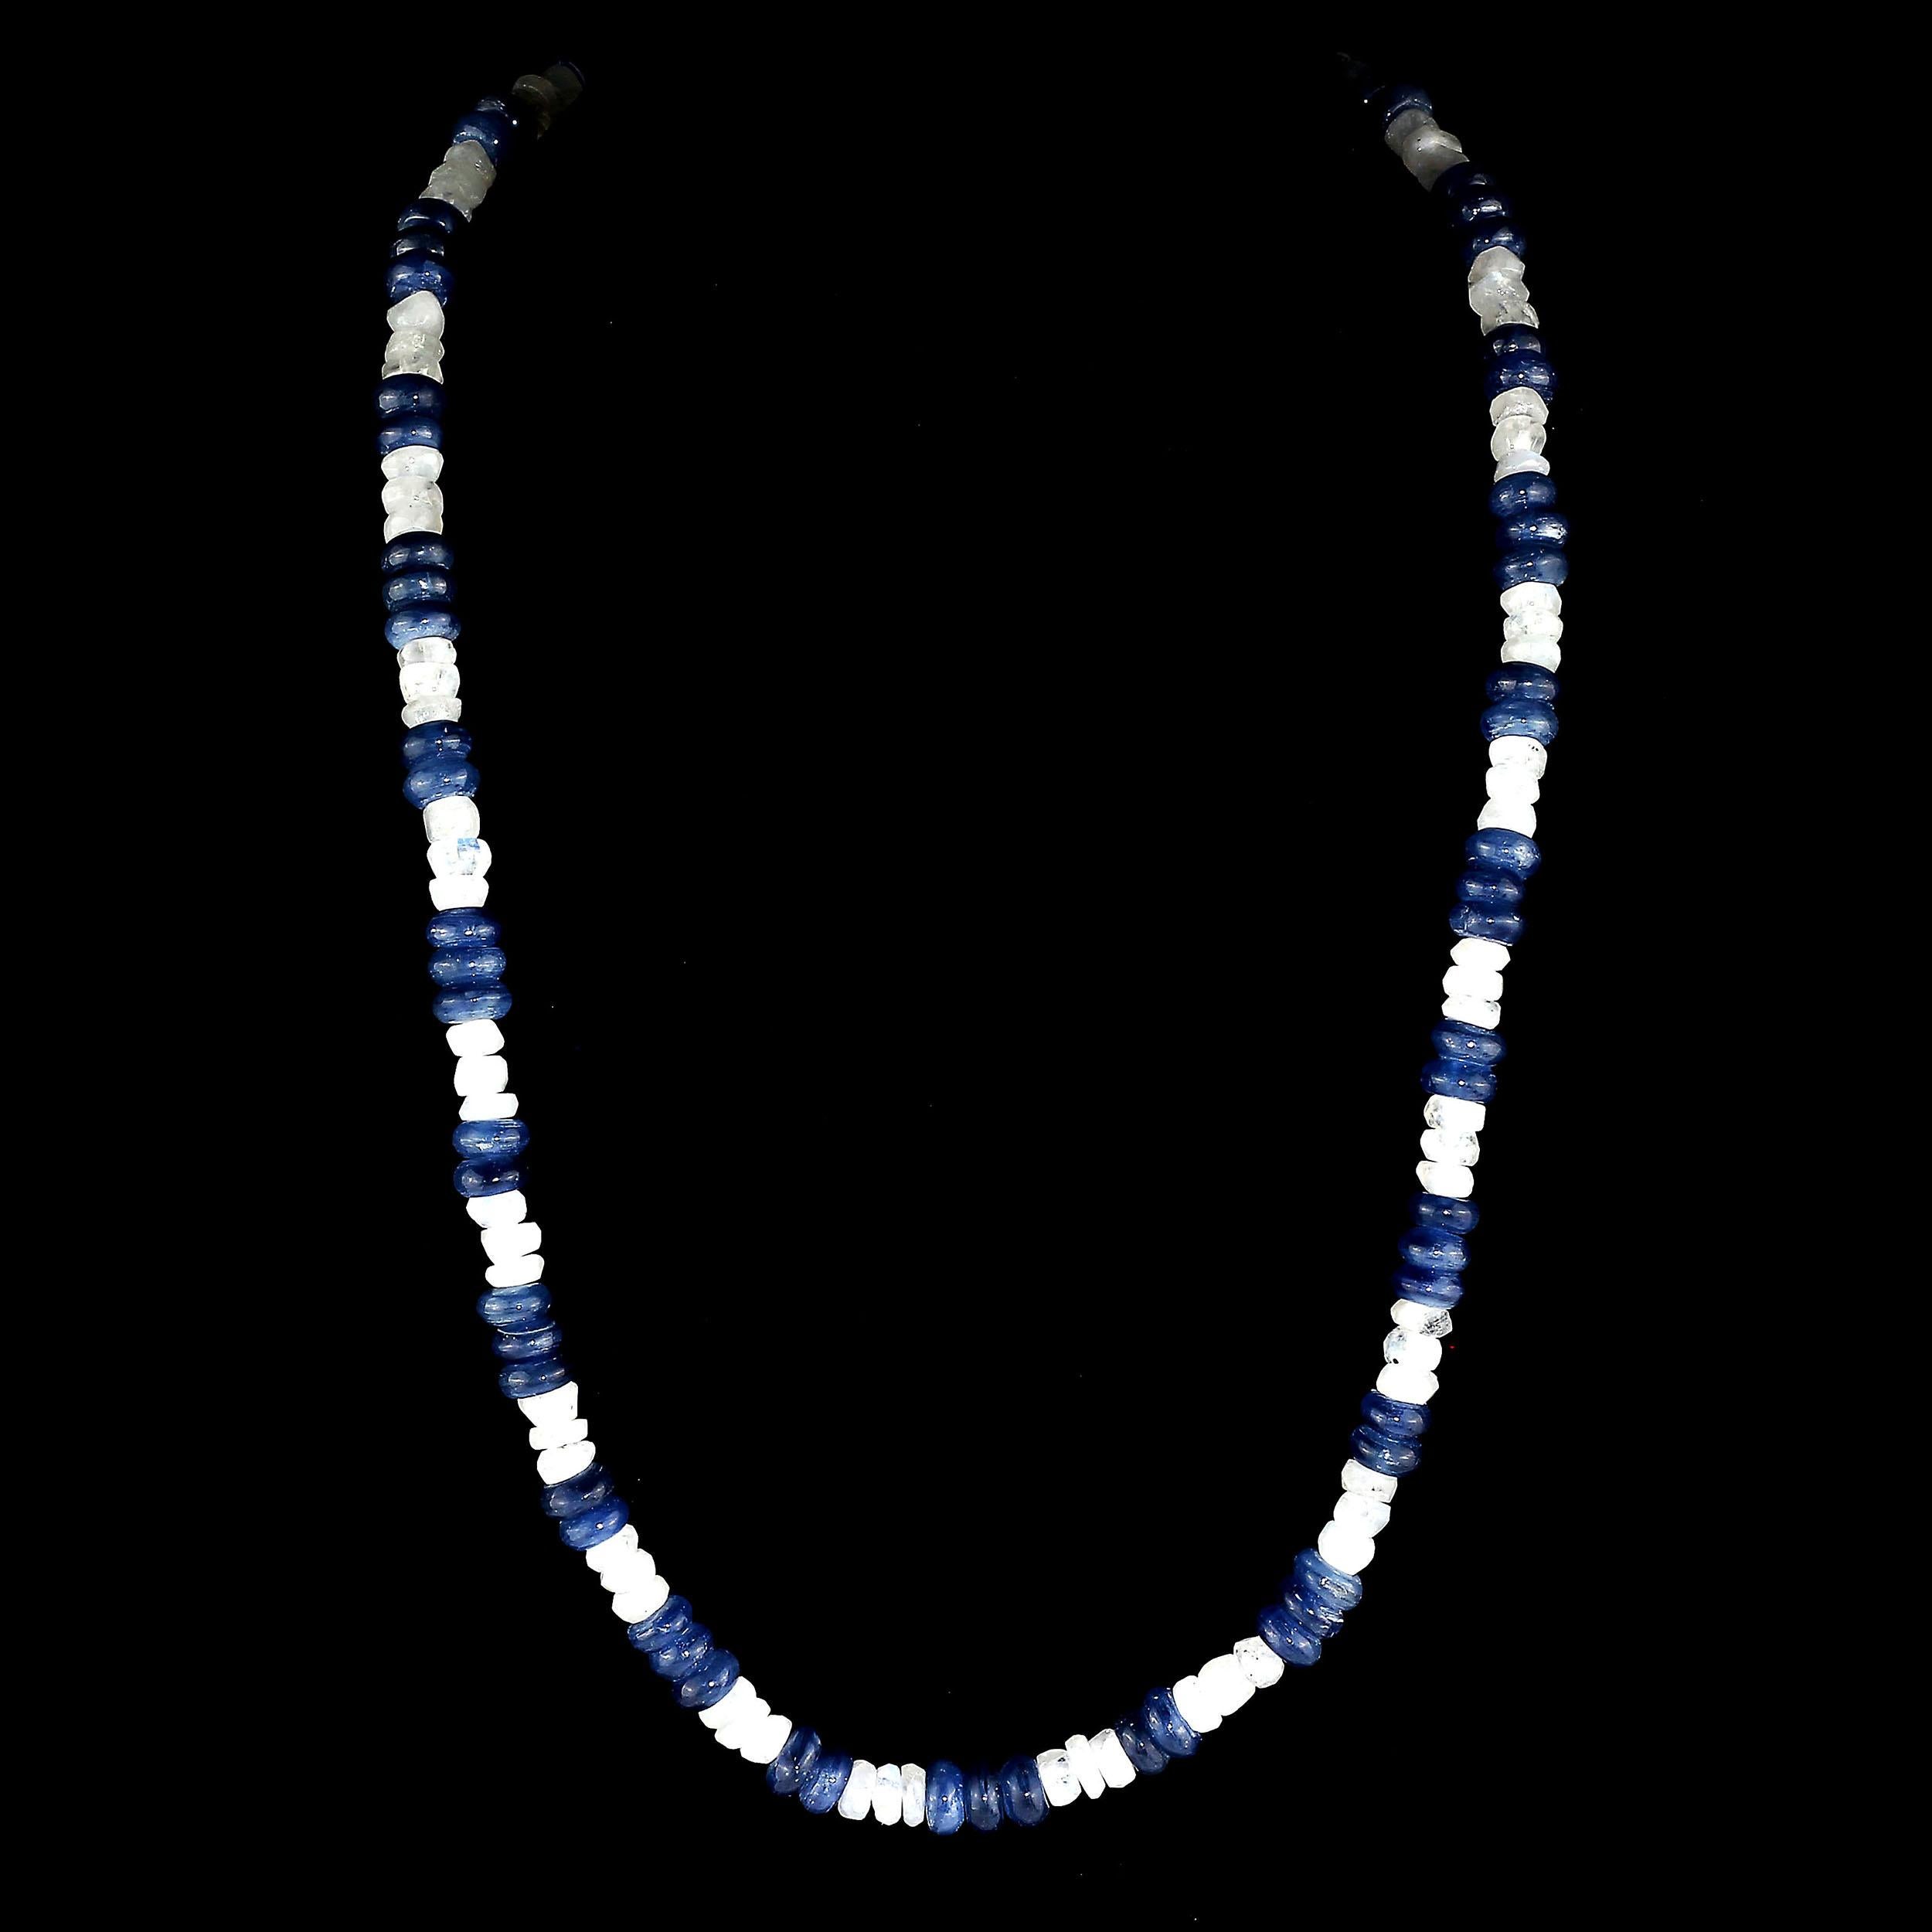 Bead Shimmering Blue and White Fun in Kyanite and Moonstone Necklace